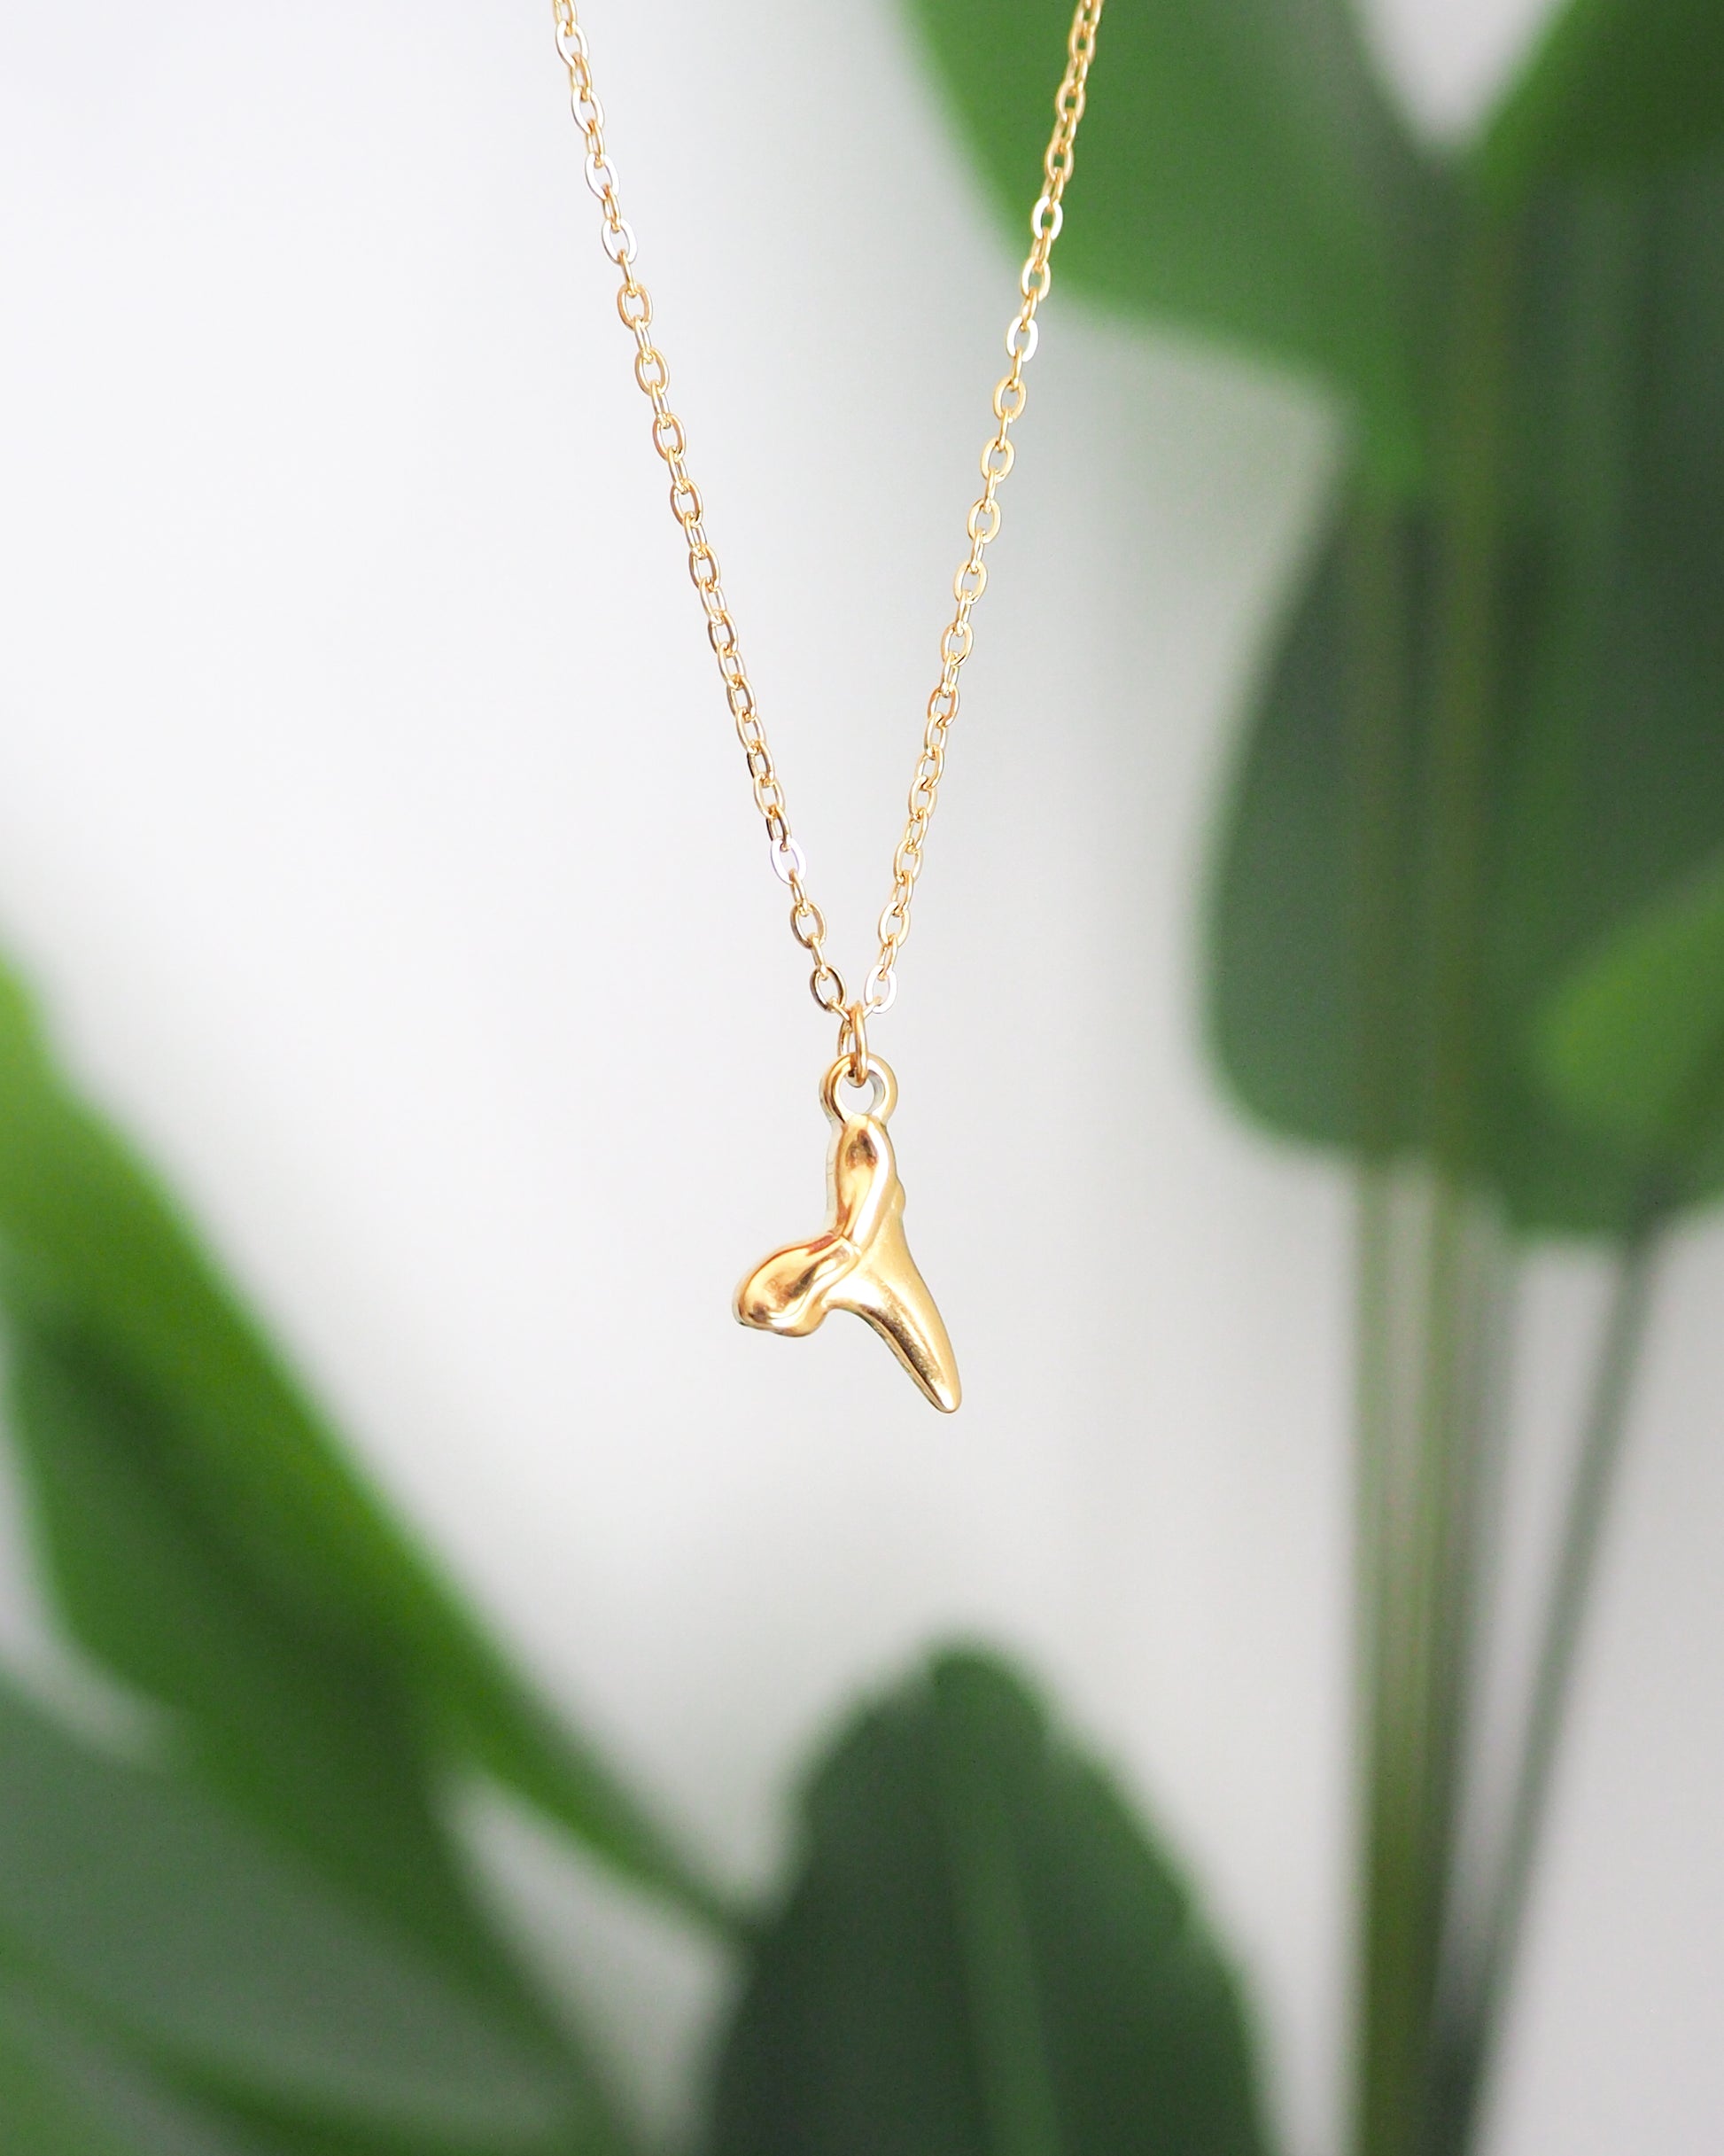 Close up of Gold Stainless Steel Necklace with Shark Tooth Pendant - Sea by Lou, Seabylou